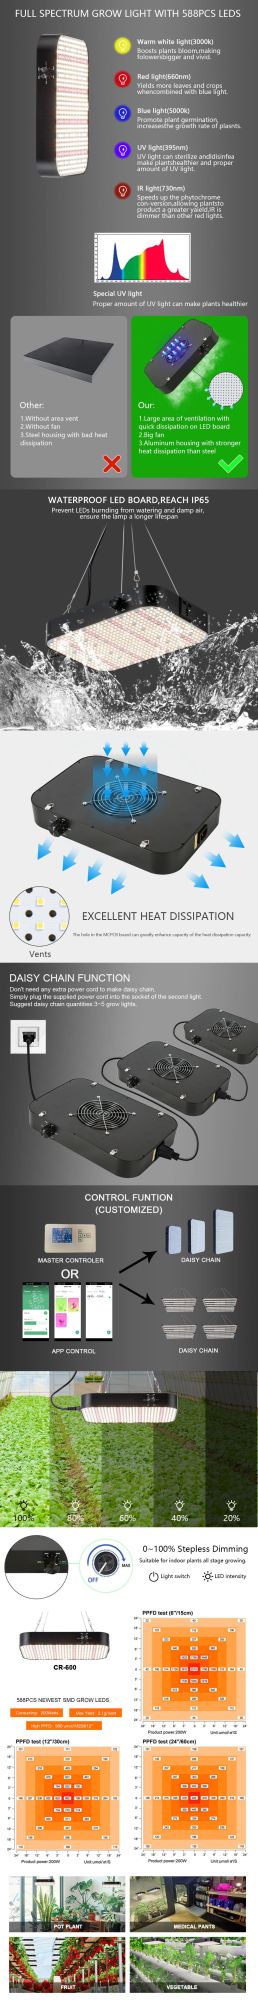 FCC CE RoHS New Patent 60W 80W 130W 200W Full Spectrum 0-100% Dimmable Daisy Chain Function High Ppf Small LED Hydroponic Light for Indoor Greenhouse Farmer